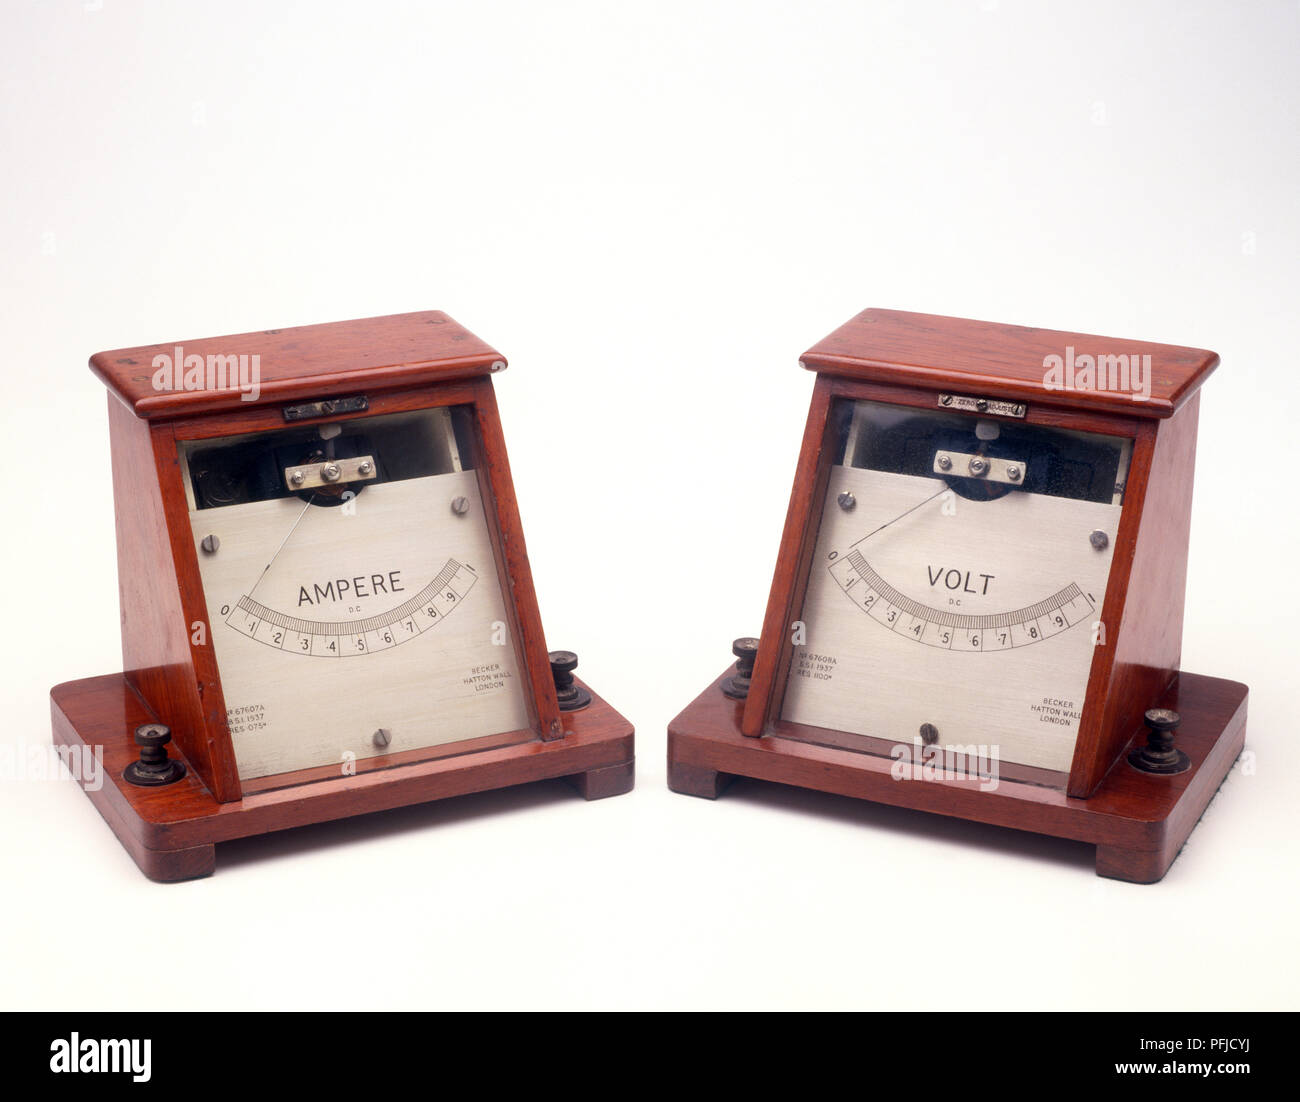 Ammeter and voltmeter, front view Stock Photo